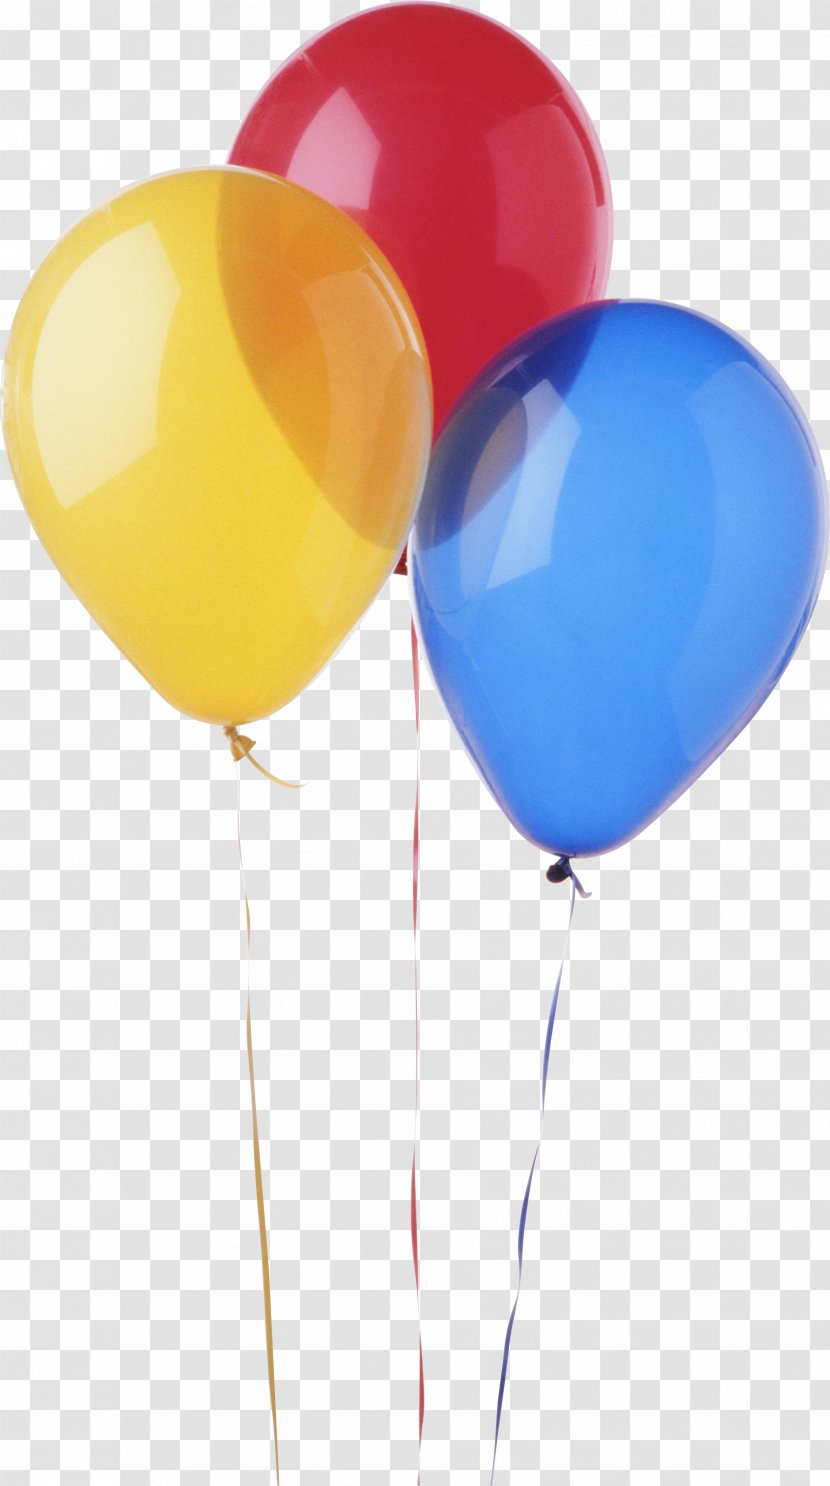 Balloon Flight - Party - Balloons Image Transparent PNG